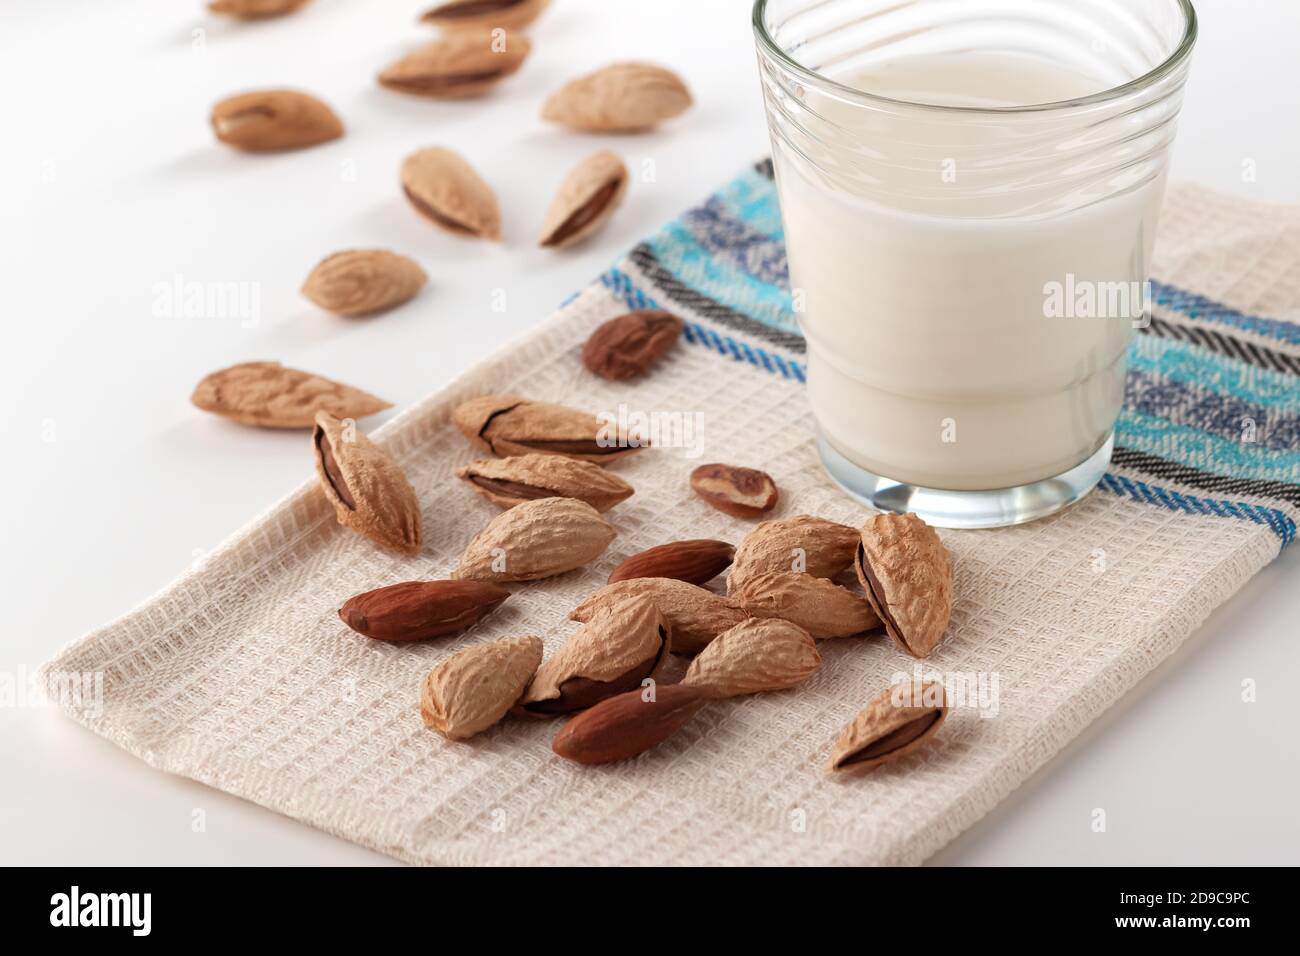 Almond milk in a glass with almonds on a white table Stock Photo